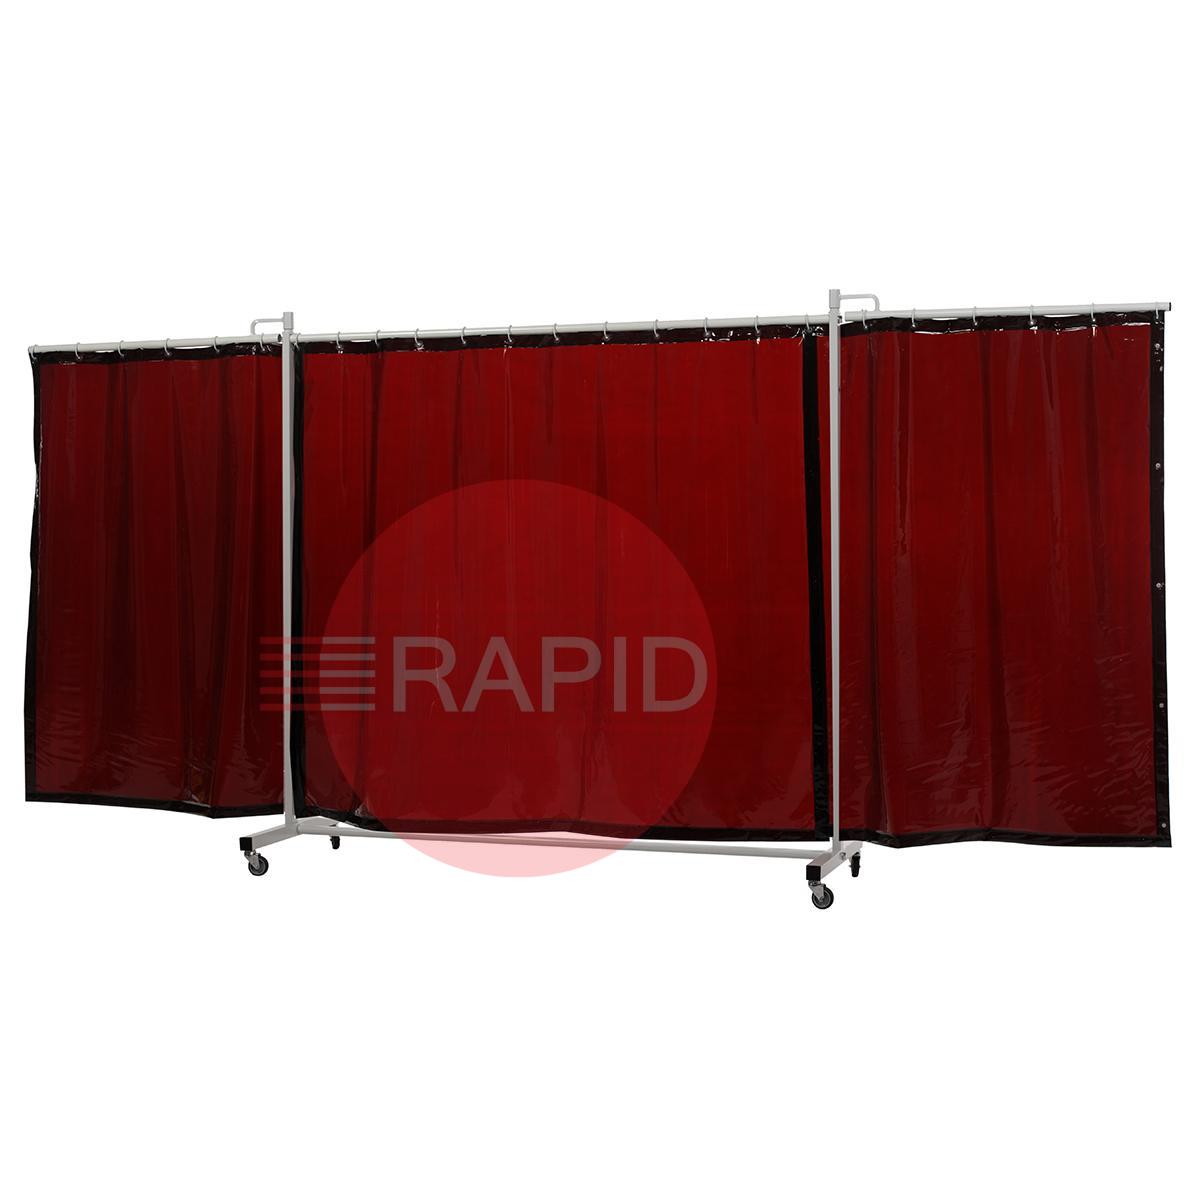 36.31.67  CEPRO Robusto XL Triptych Welding Screen with Bronze-CE Curtain - 4.4m Wide x 2.1m High, Approved EN 25980